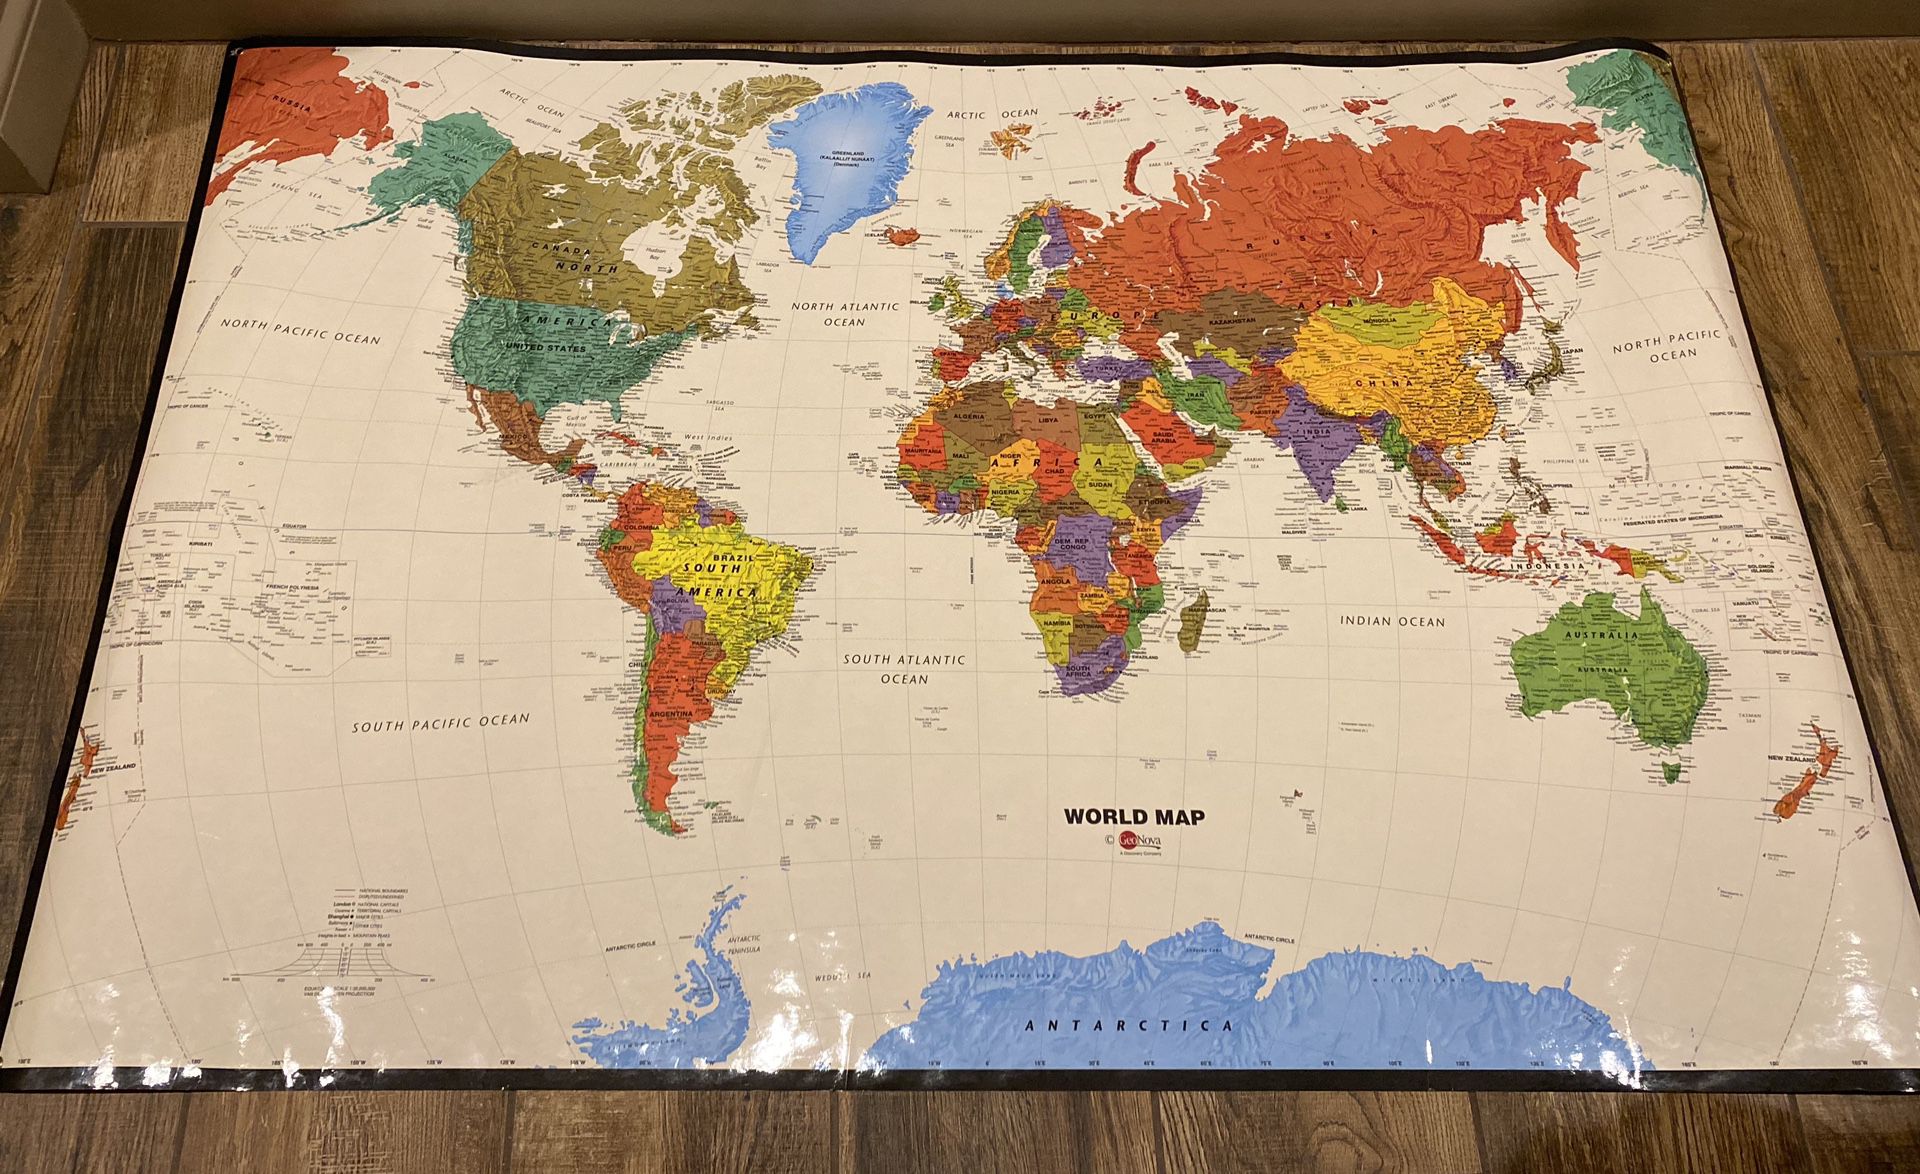 4 poster size maps: 2 of the world and 2 of the US